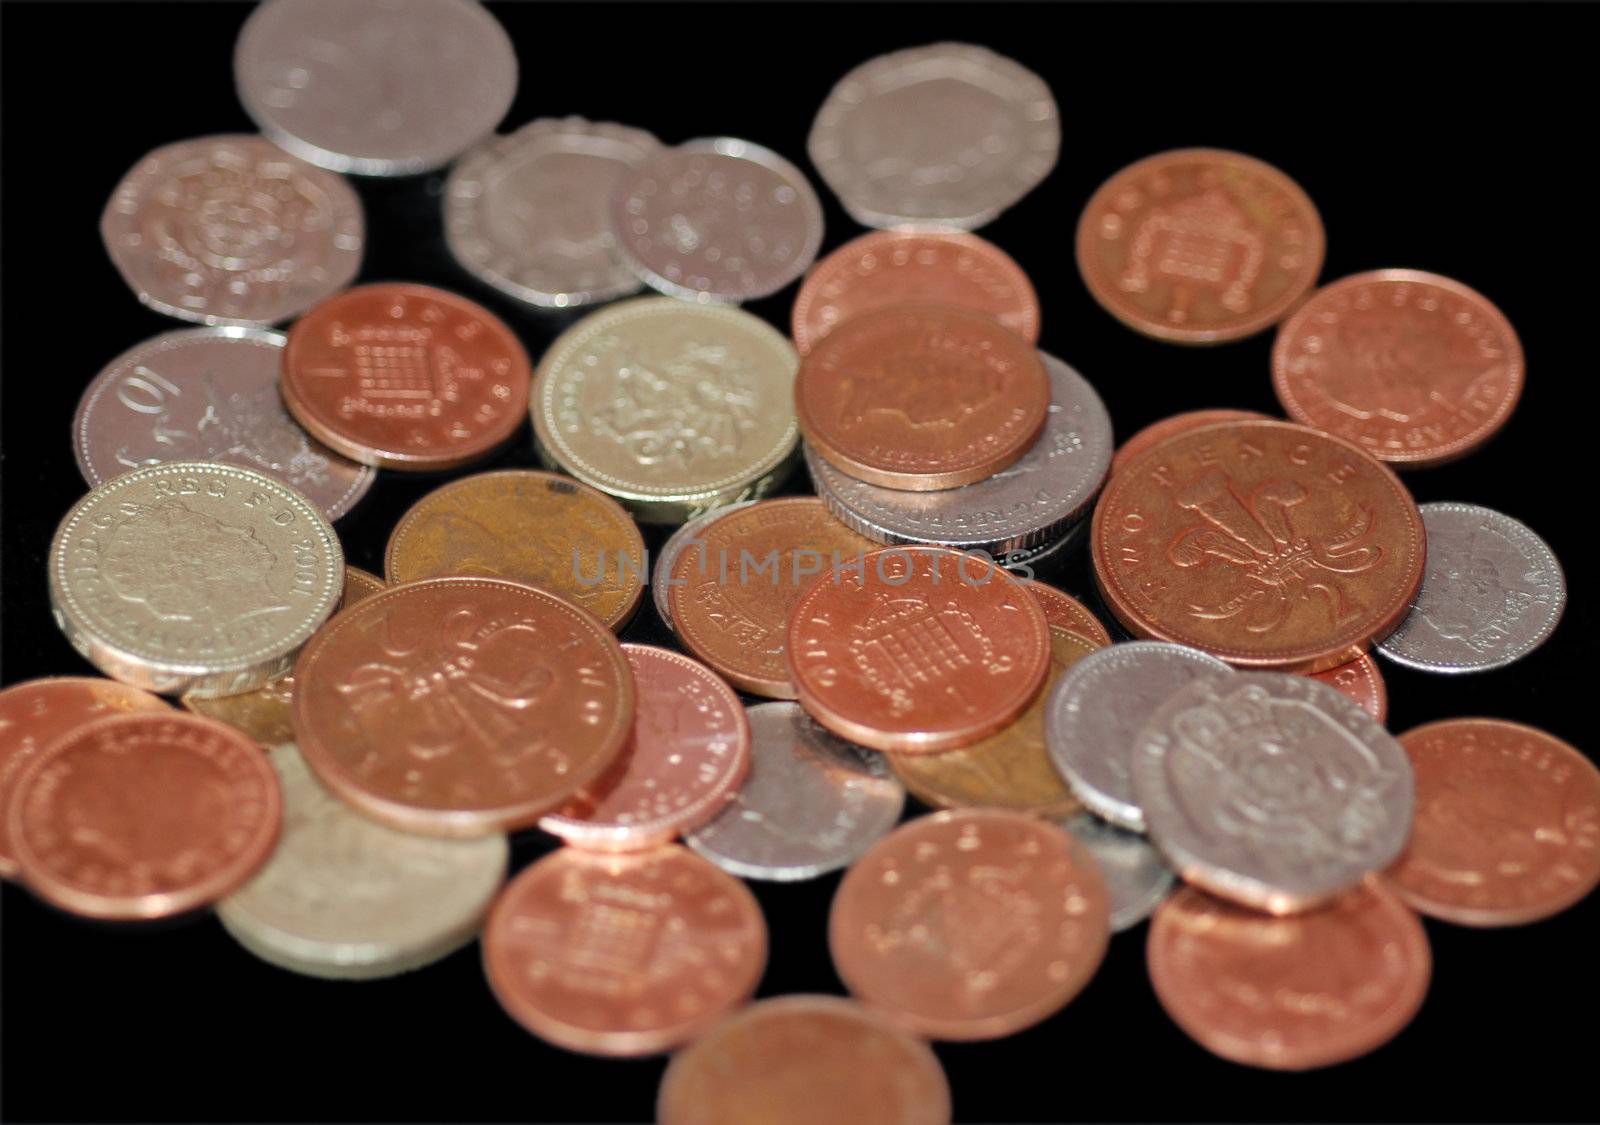 Pile of UK Coins by pwillitts